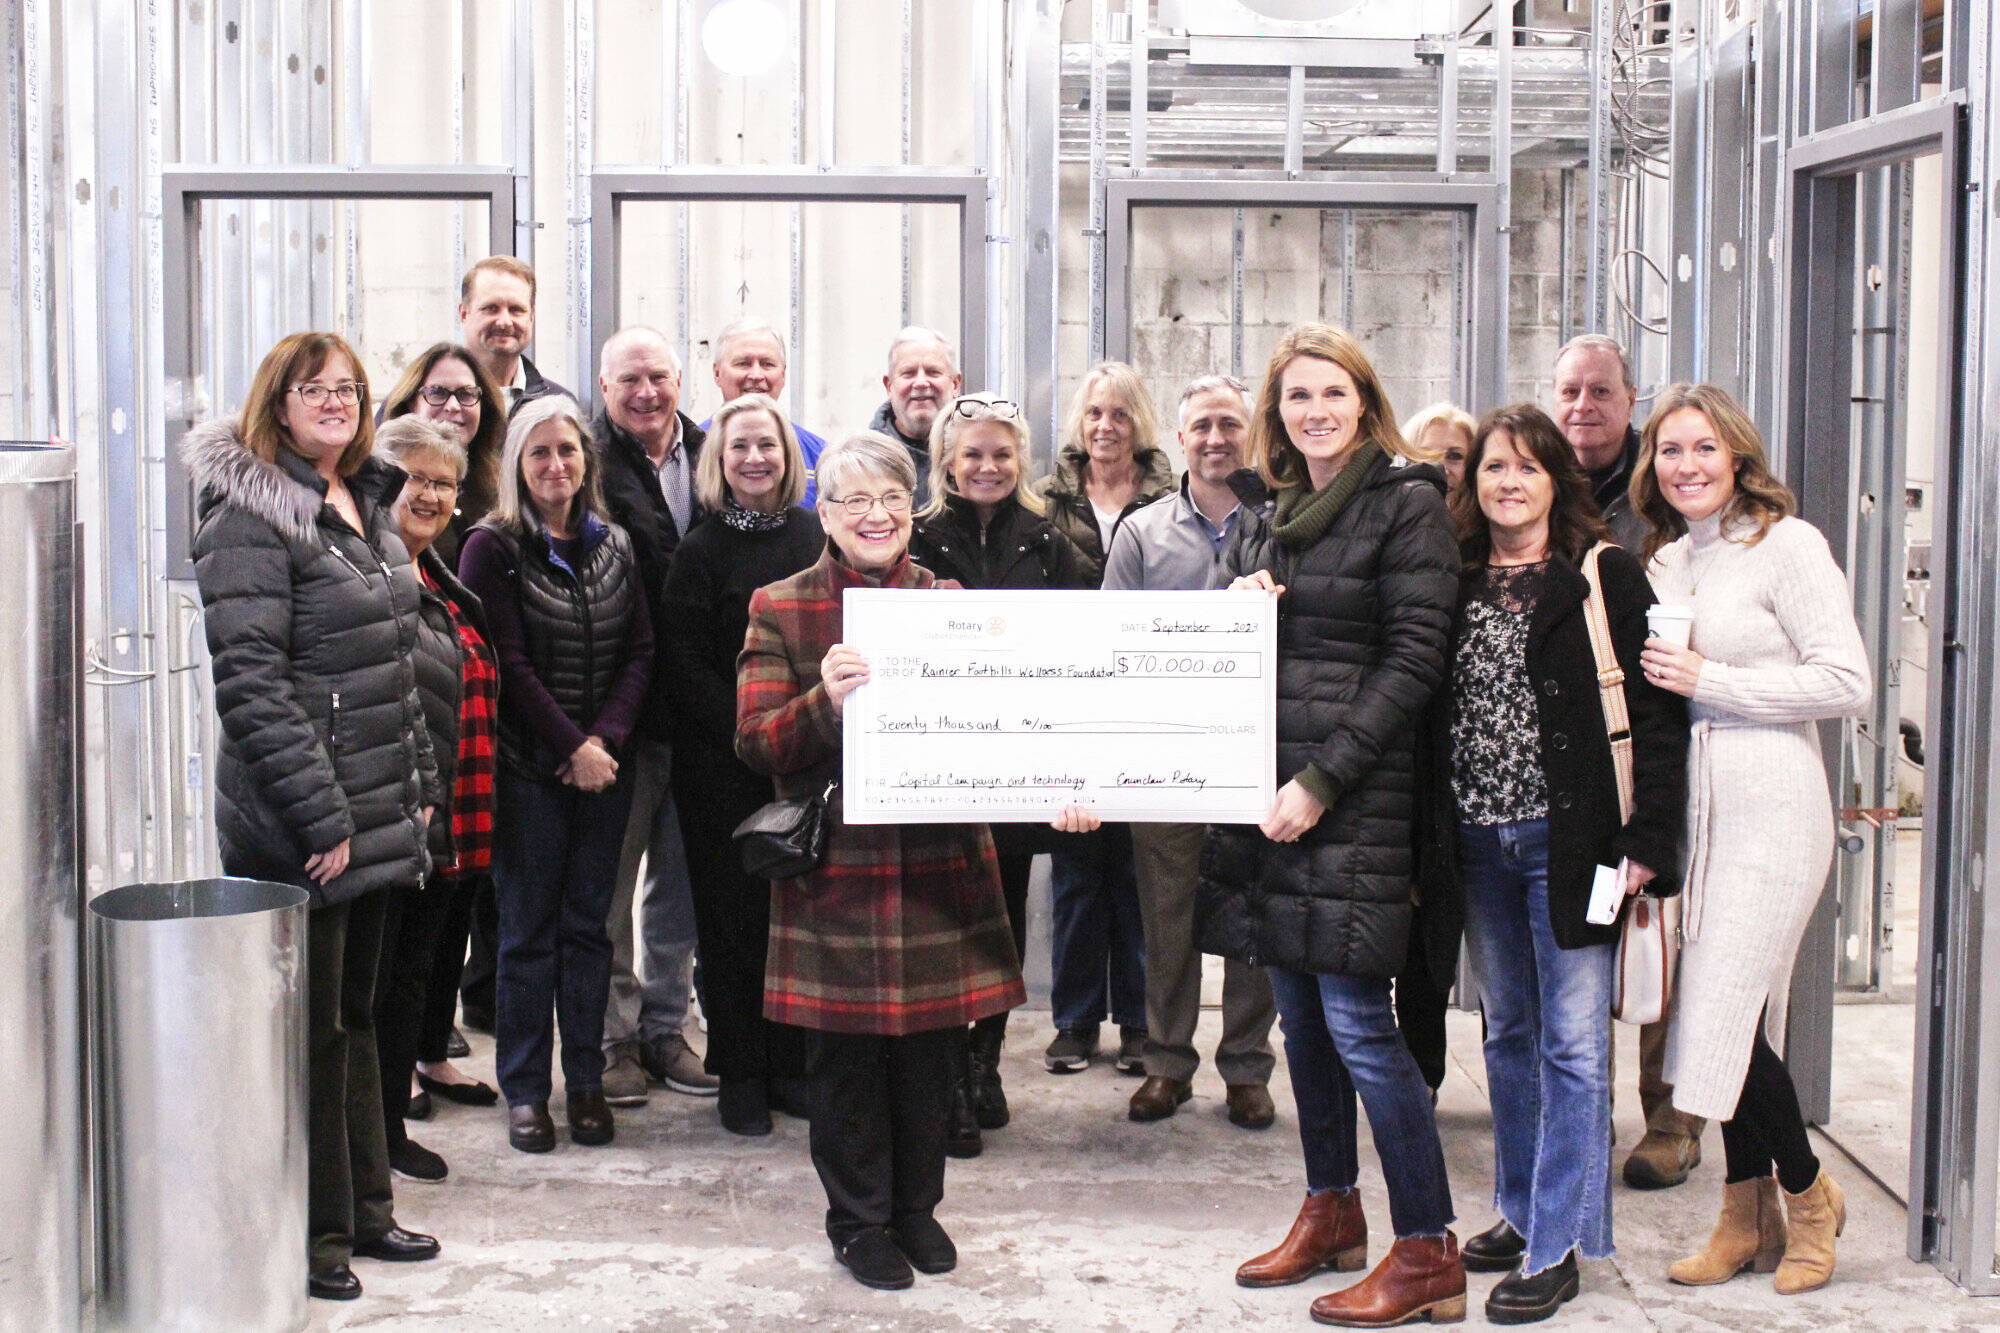 Photo by Ray Miller-Still
The Enumclaw Rotary and the Rainier Foothills Wellness Foundation met inside “The Foundation” on Jan. 15 to celebrate a grant of $70,000 so RFWF can finish renovations inside its new home.